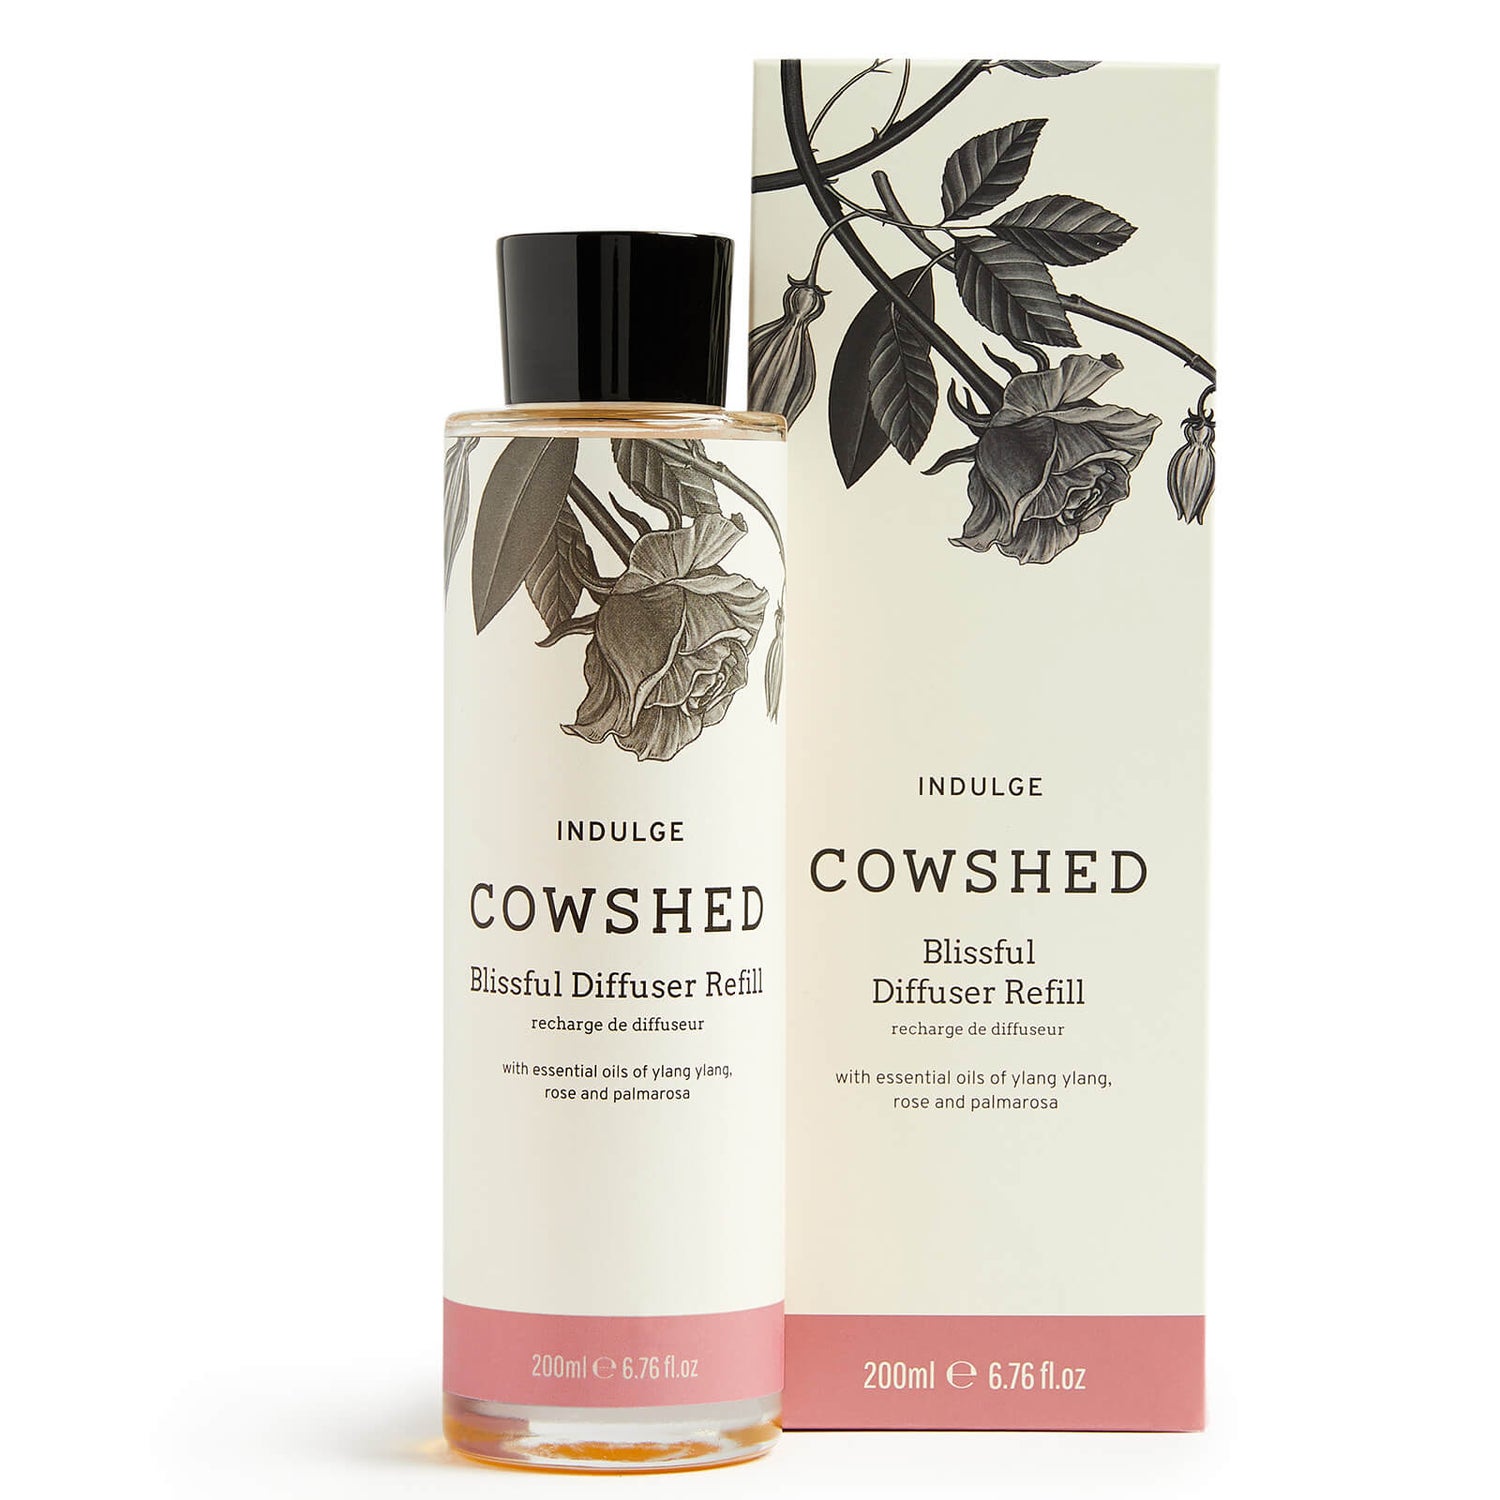 Cowshed Indulge Diffuser Refill 200ml